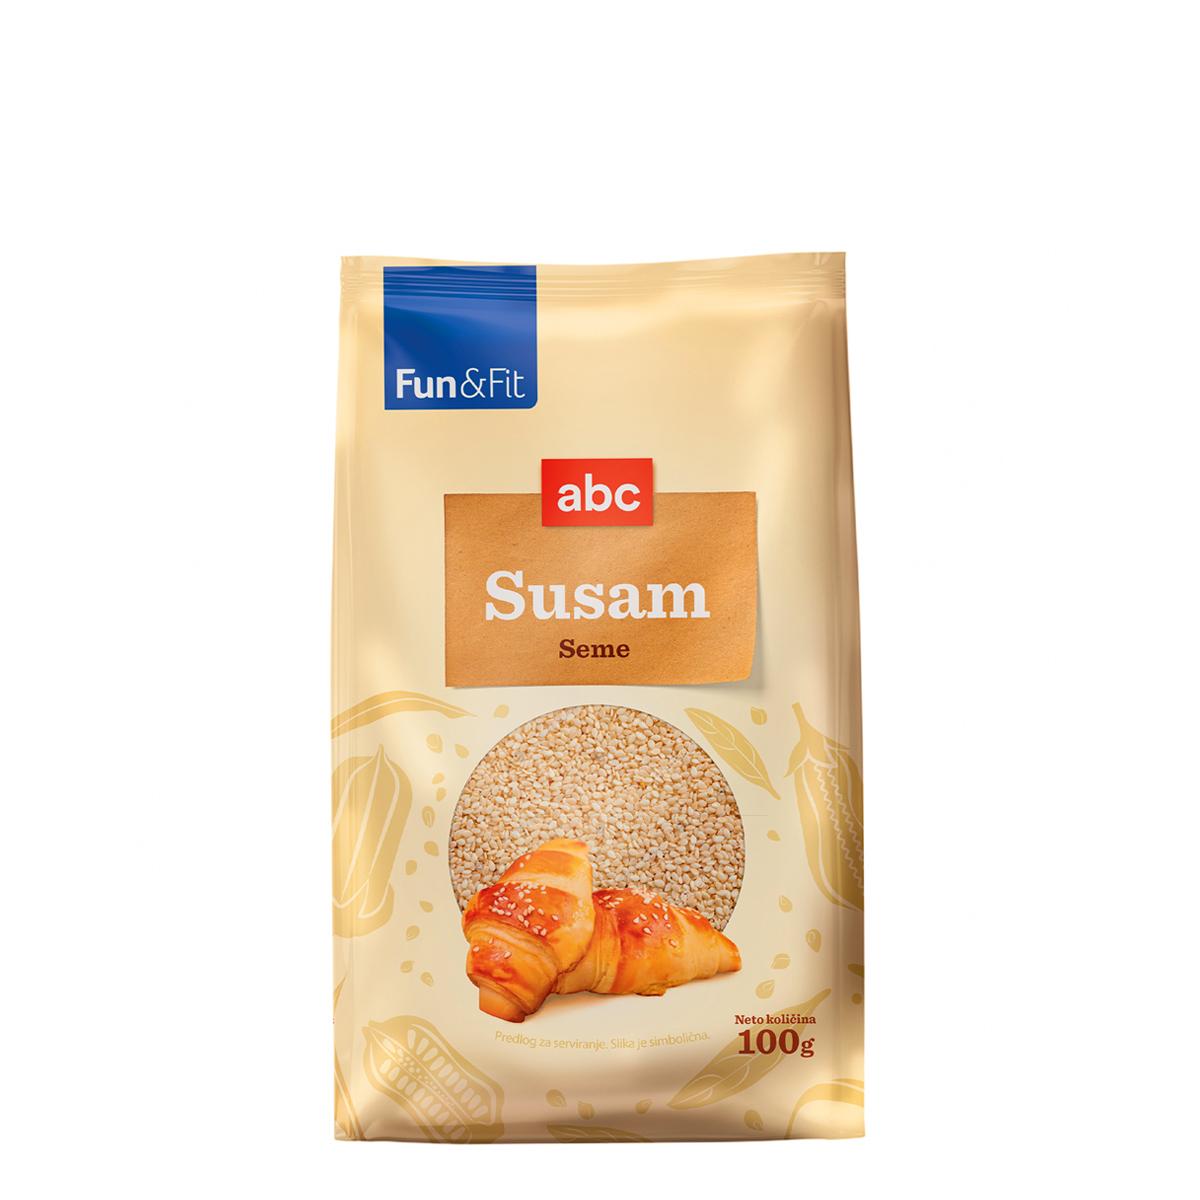 Selected image for ABC Susam 100 g